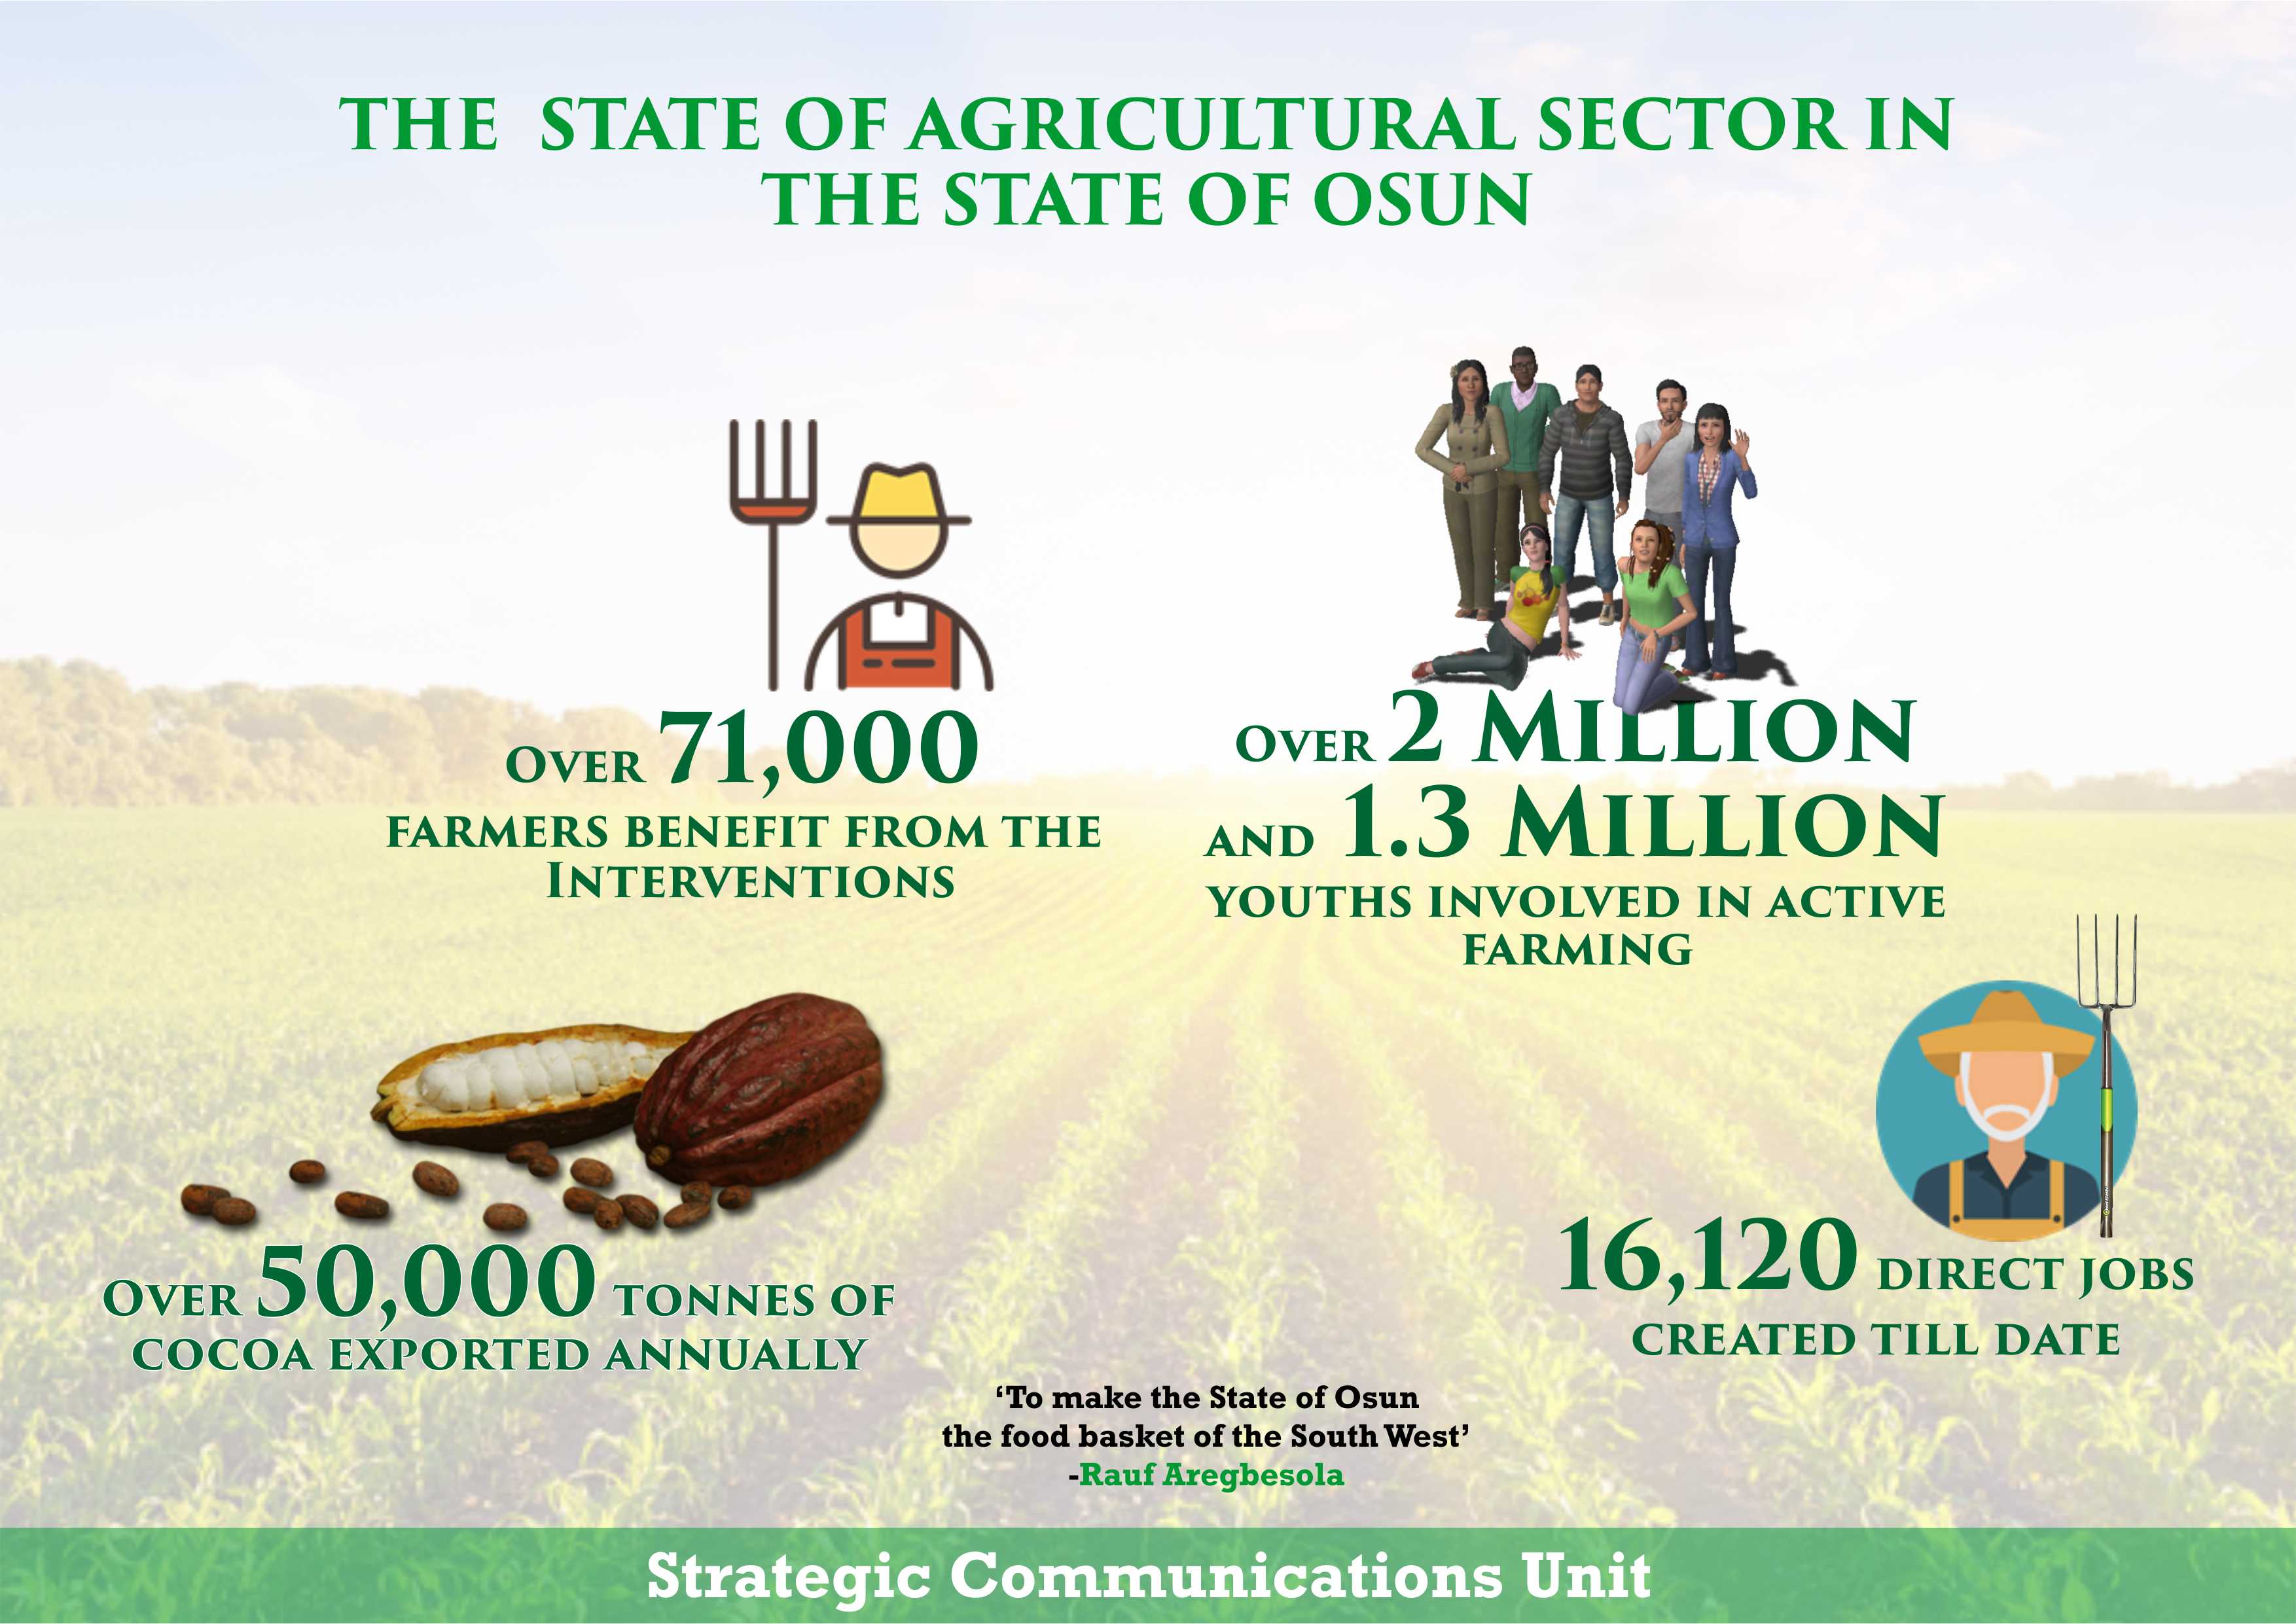 These Eight (8) Facts About The Agricultural Sector In Osun Will Amaze You